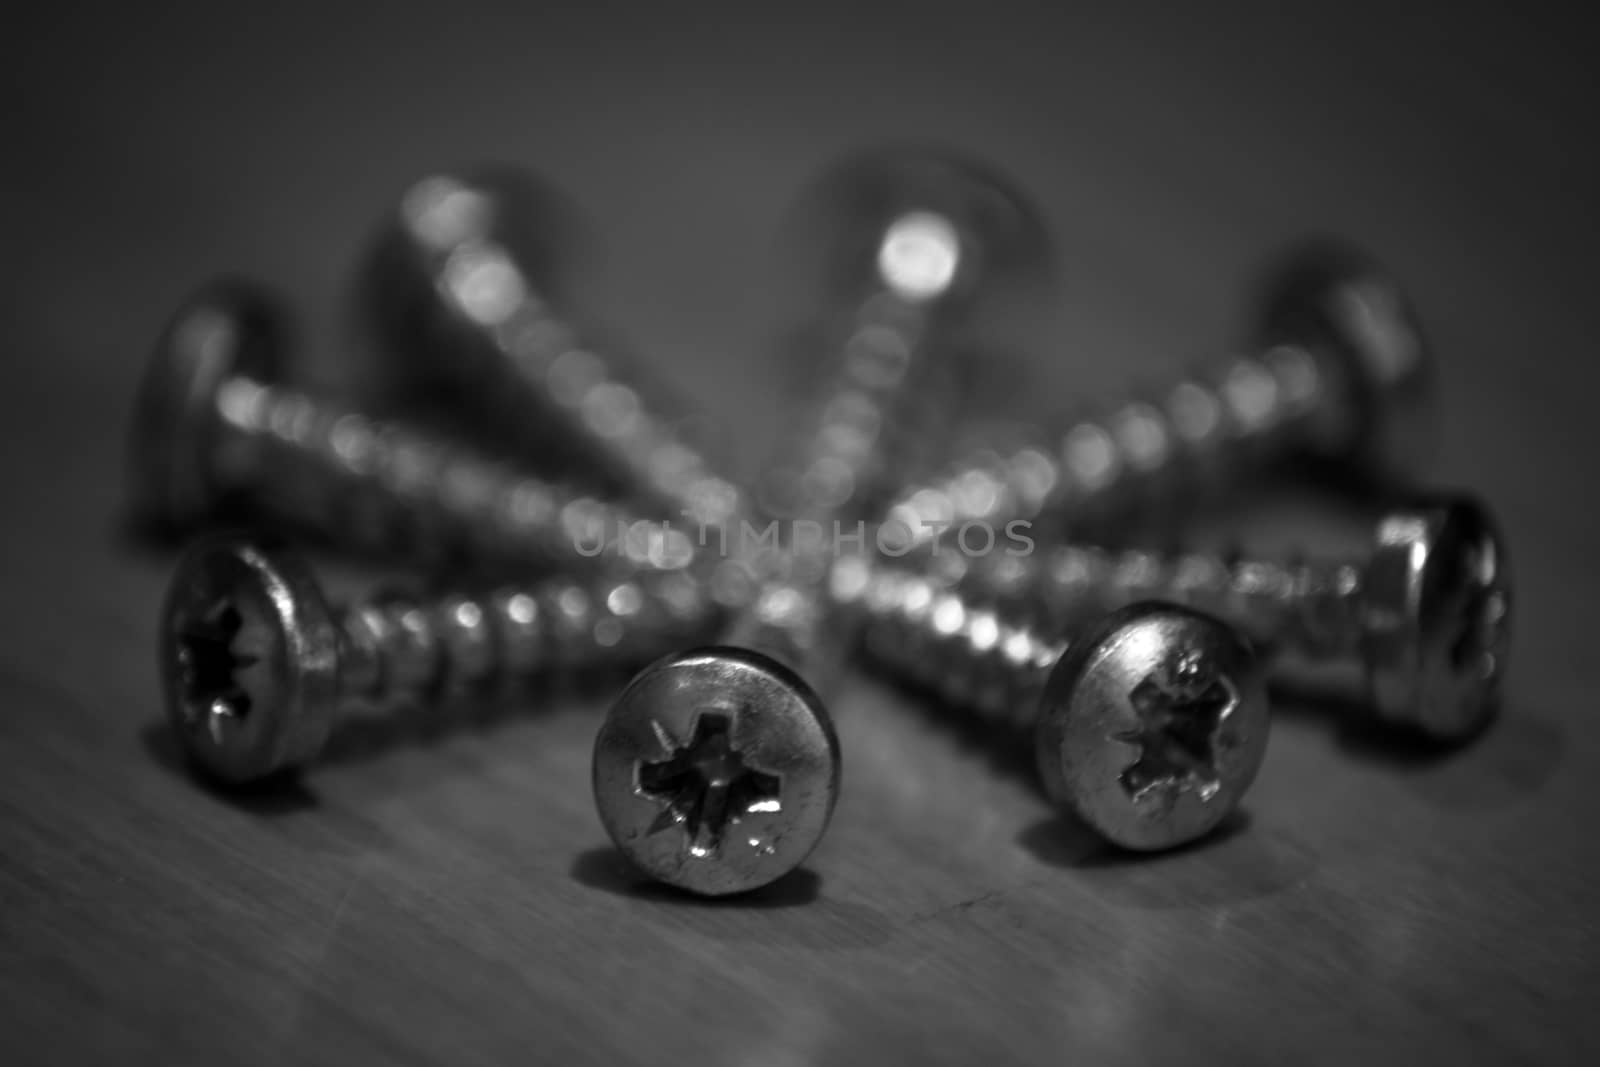 Screws arranged in a circle by arvidnorberg